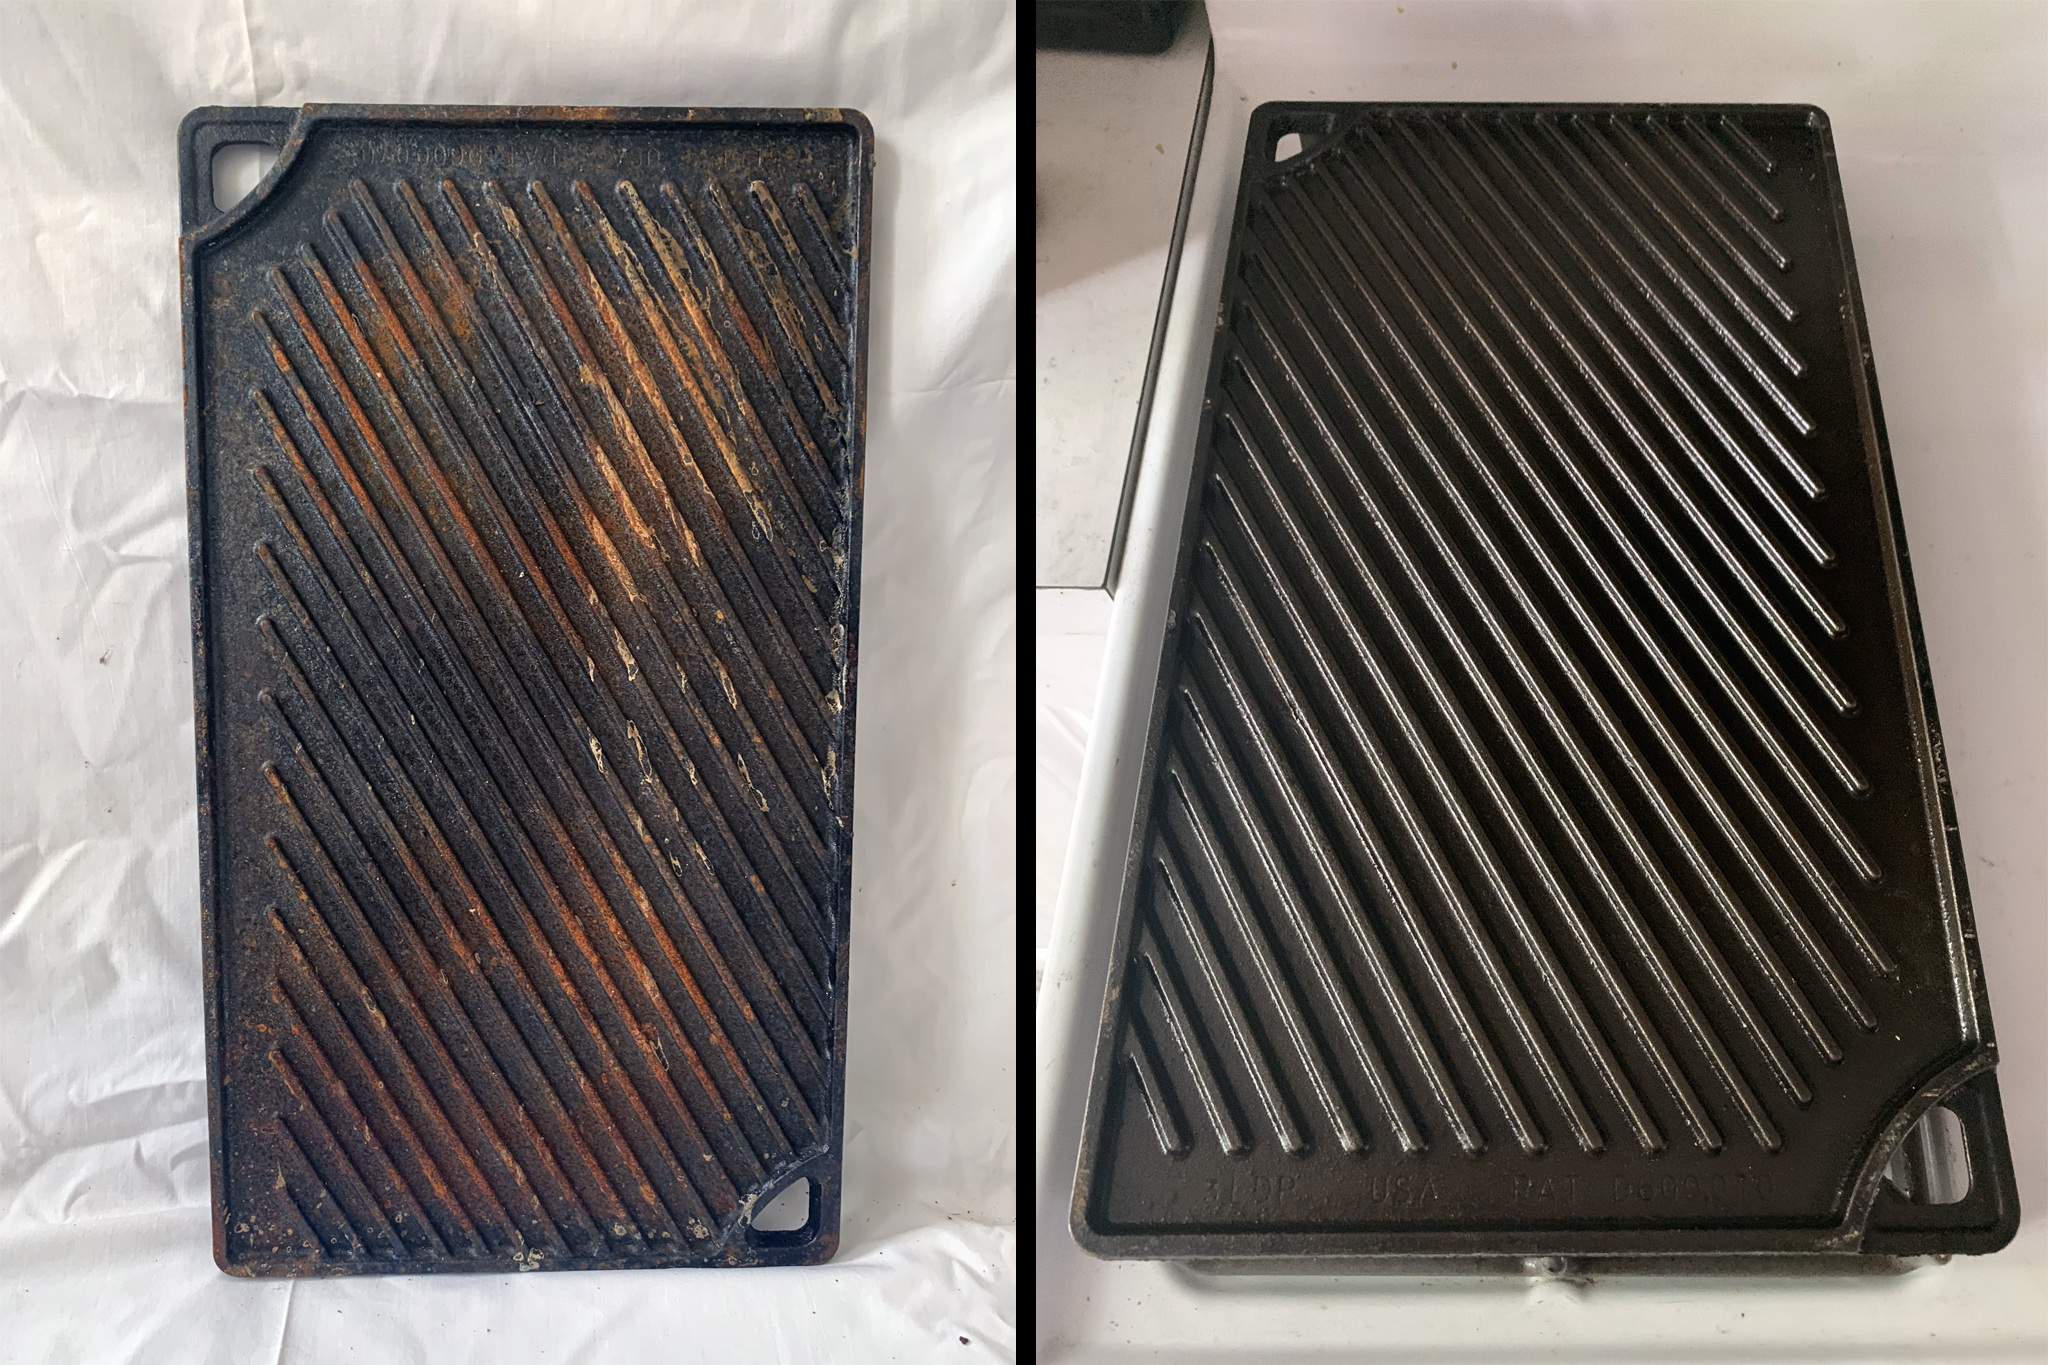 How to Clean a Cast Iron Grill